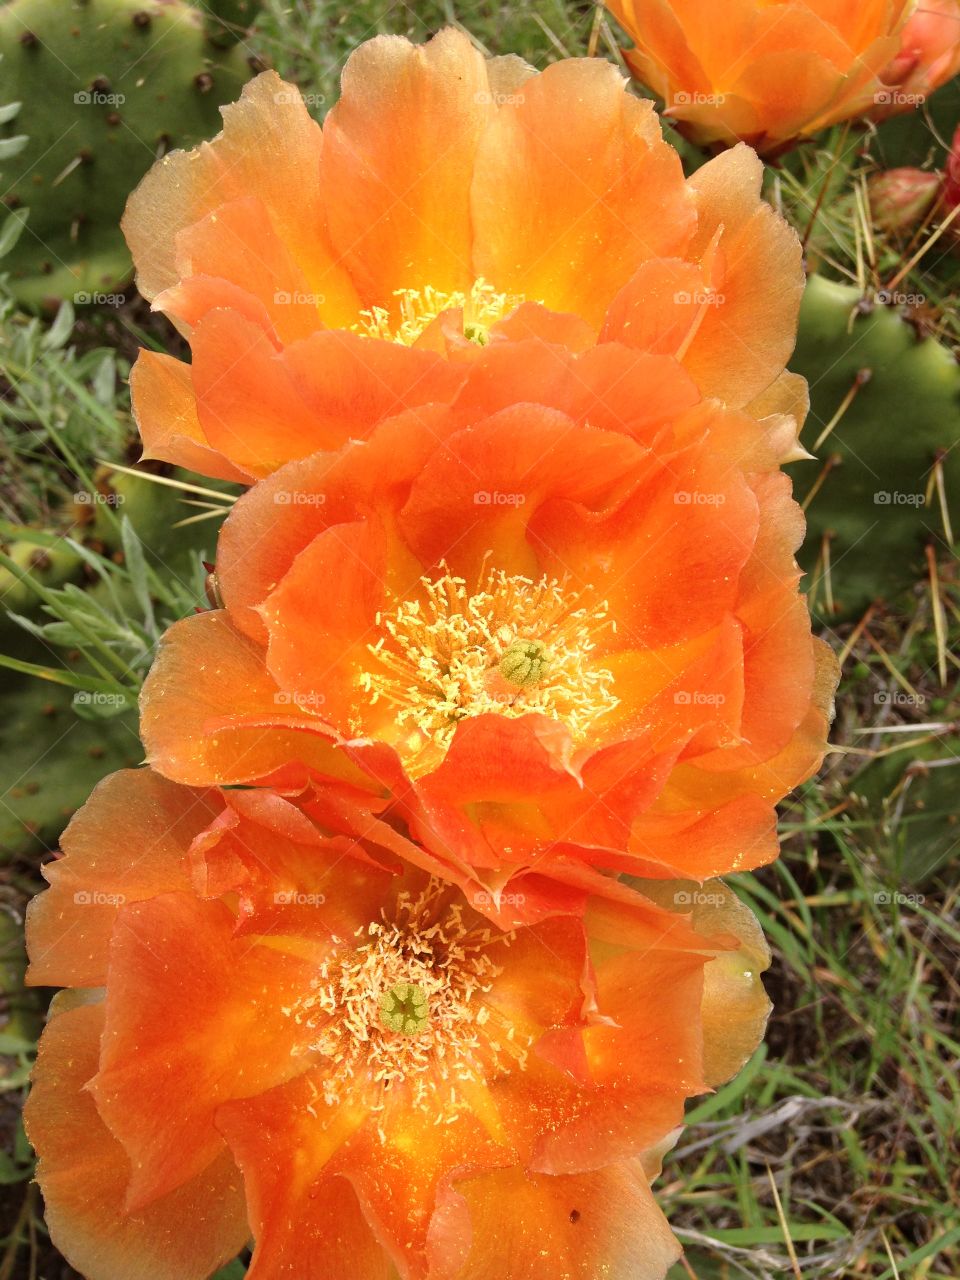 Beauty among the thorns. Prickly pear cactus flowers